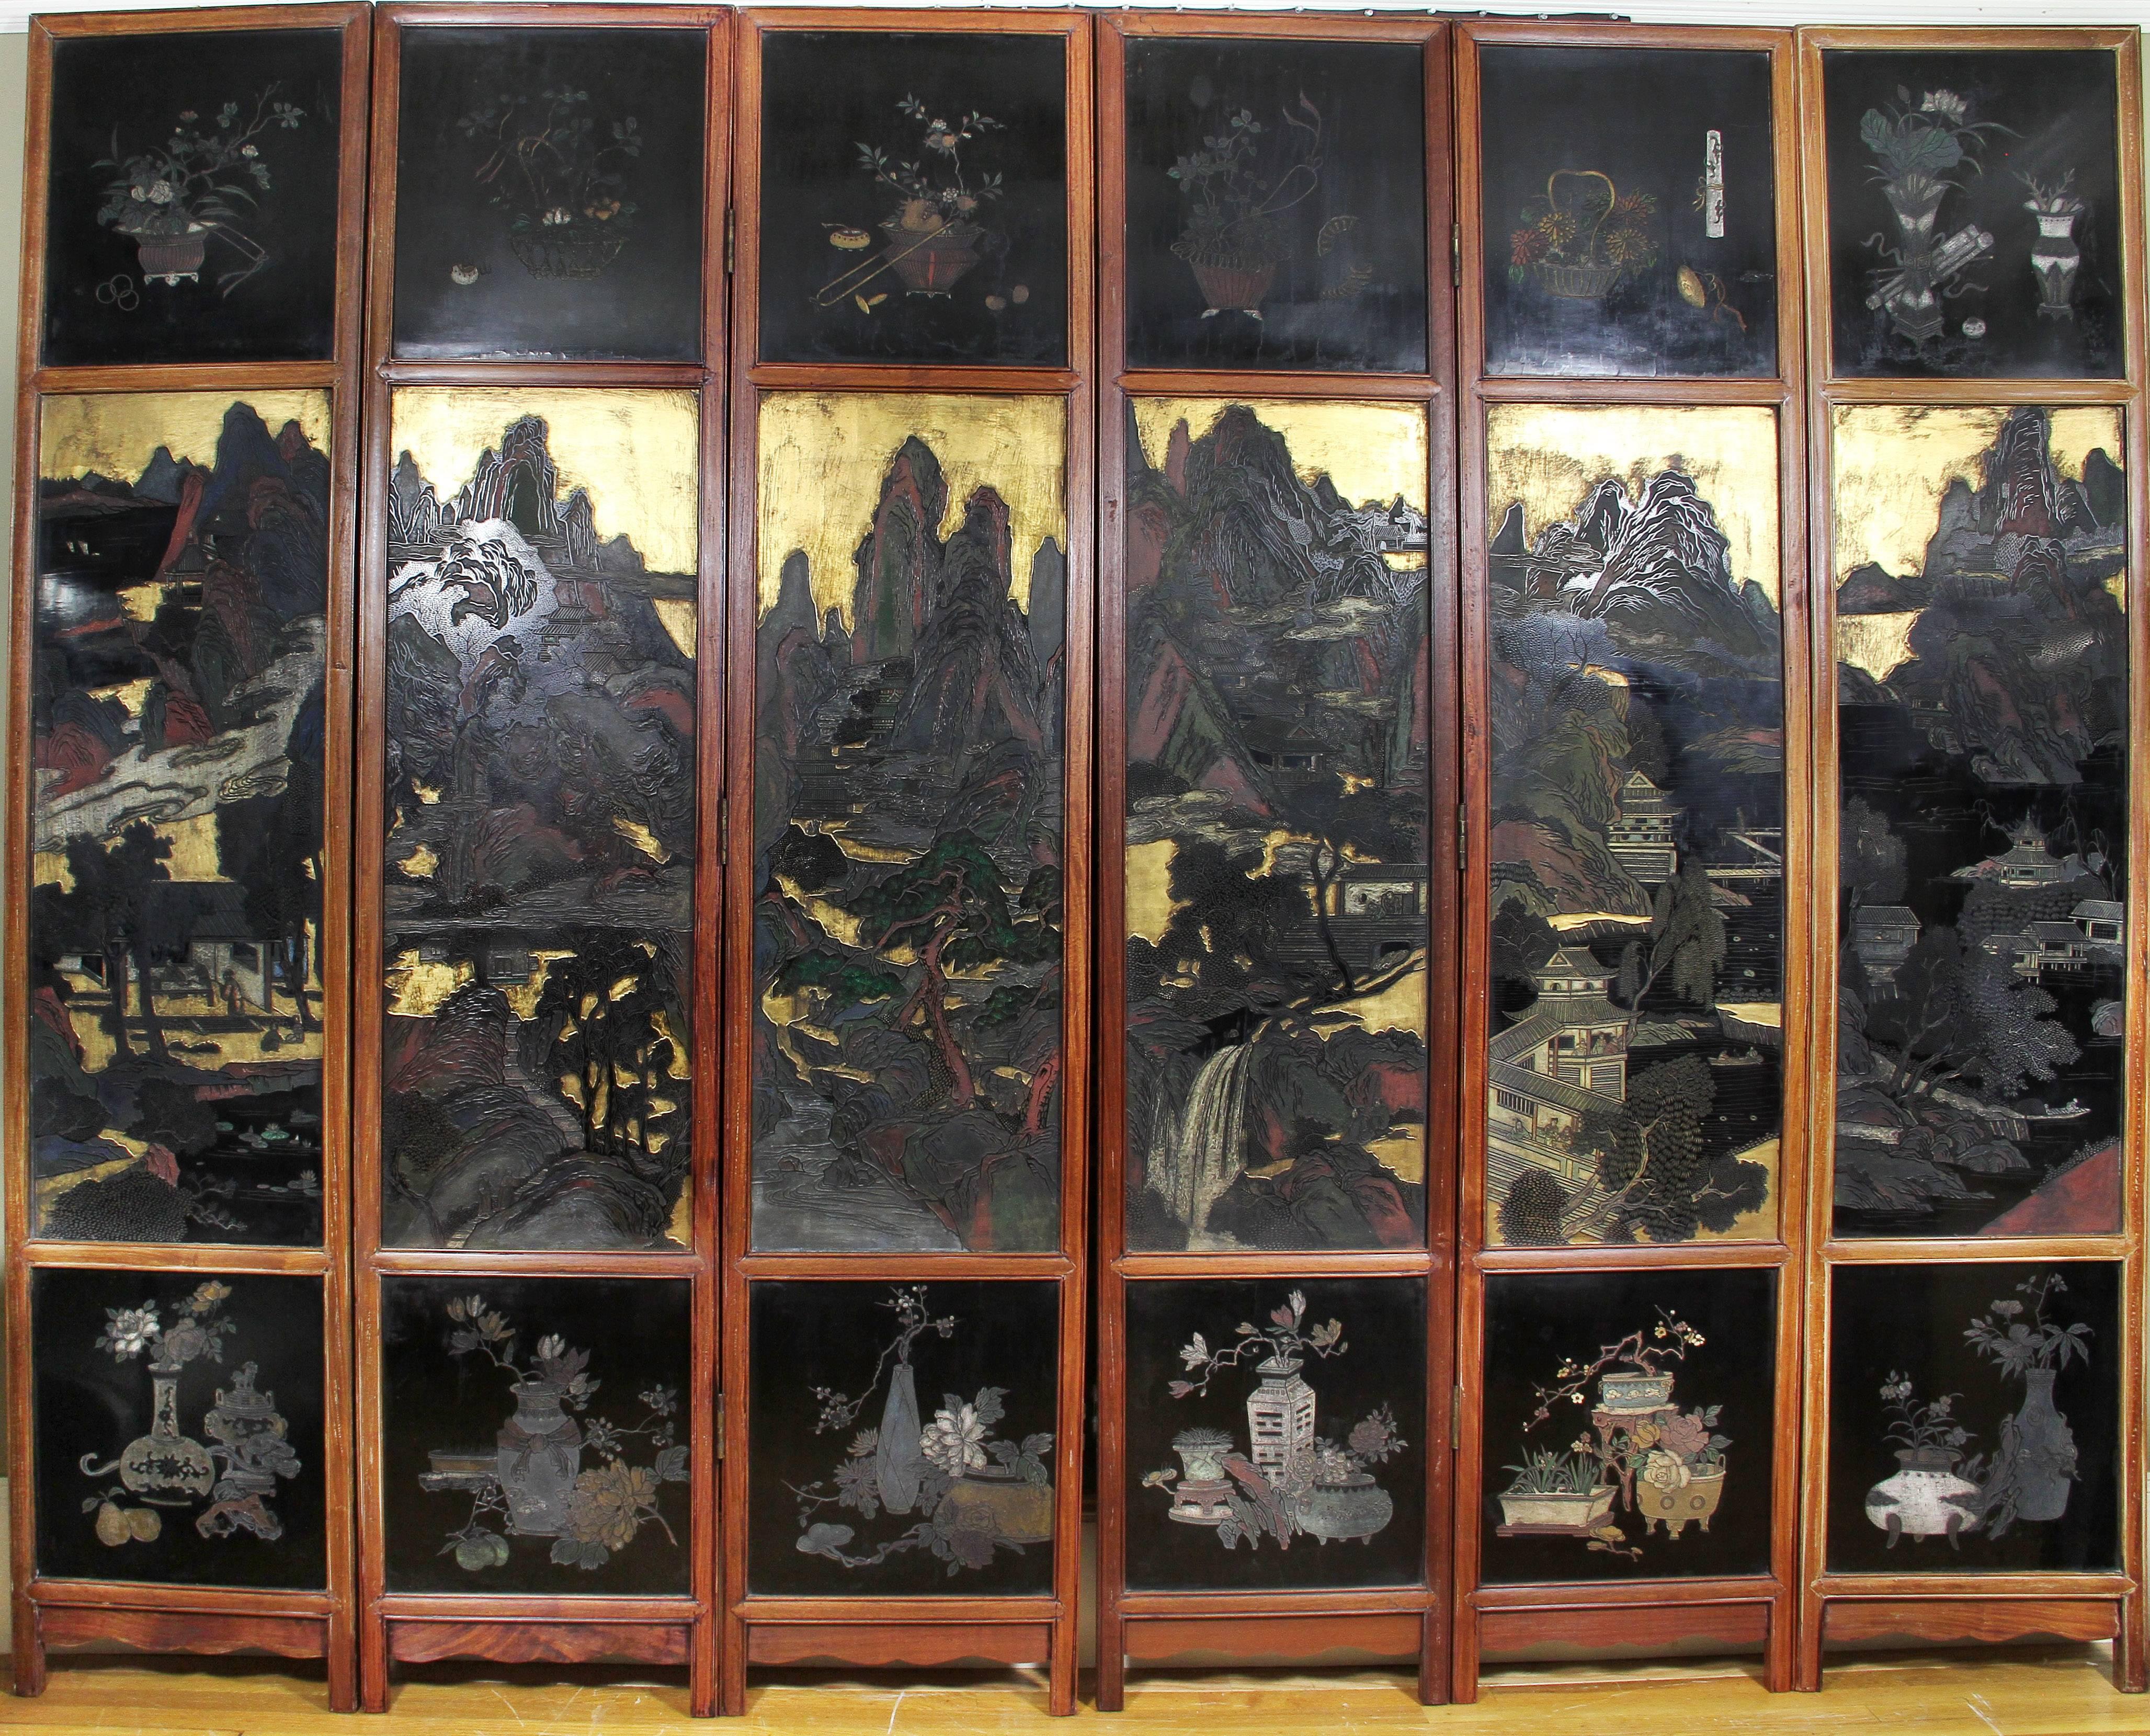 Double-sided with one side with scenes depicting court life, the back animal and floral scenes, each panel in a teakwood frame.